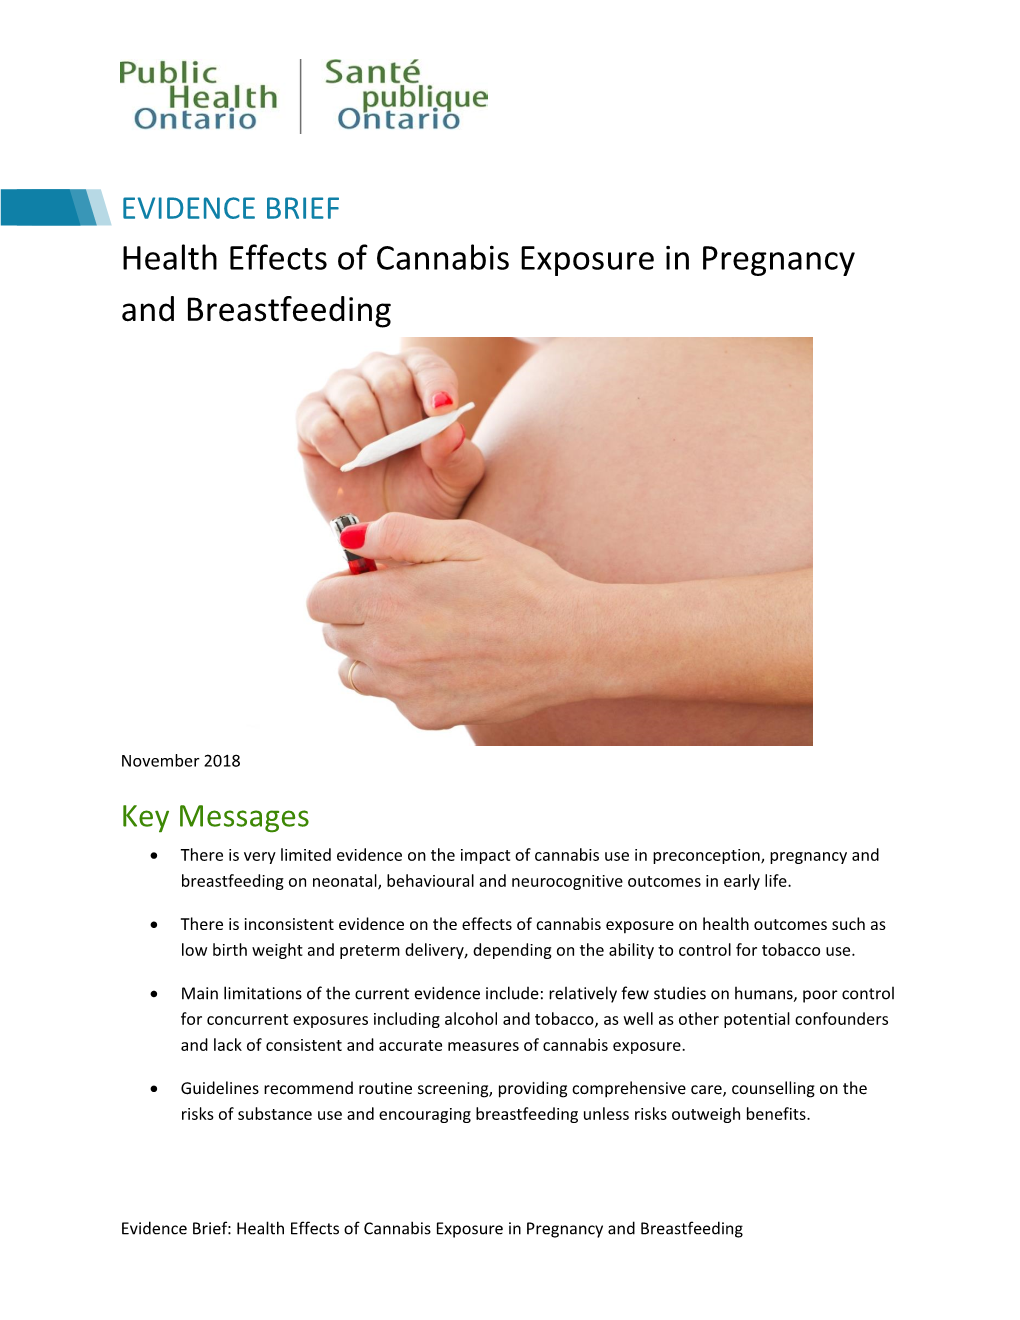 Health Effects of Cannabis Exposure in Pregnancy and Breastfeeding